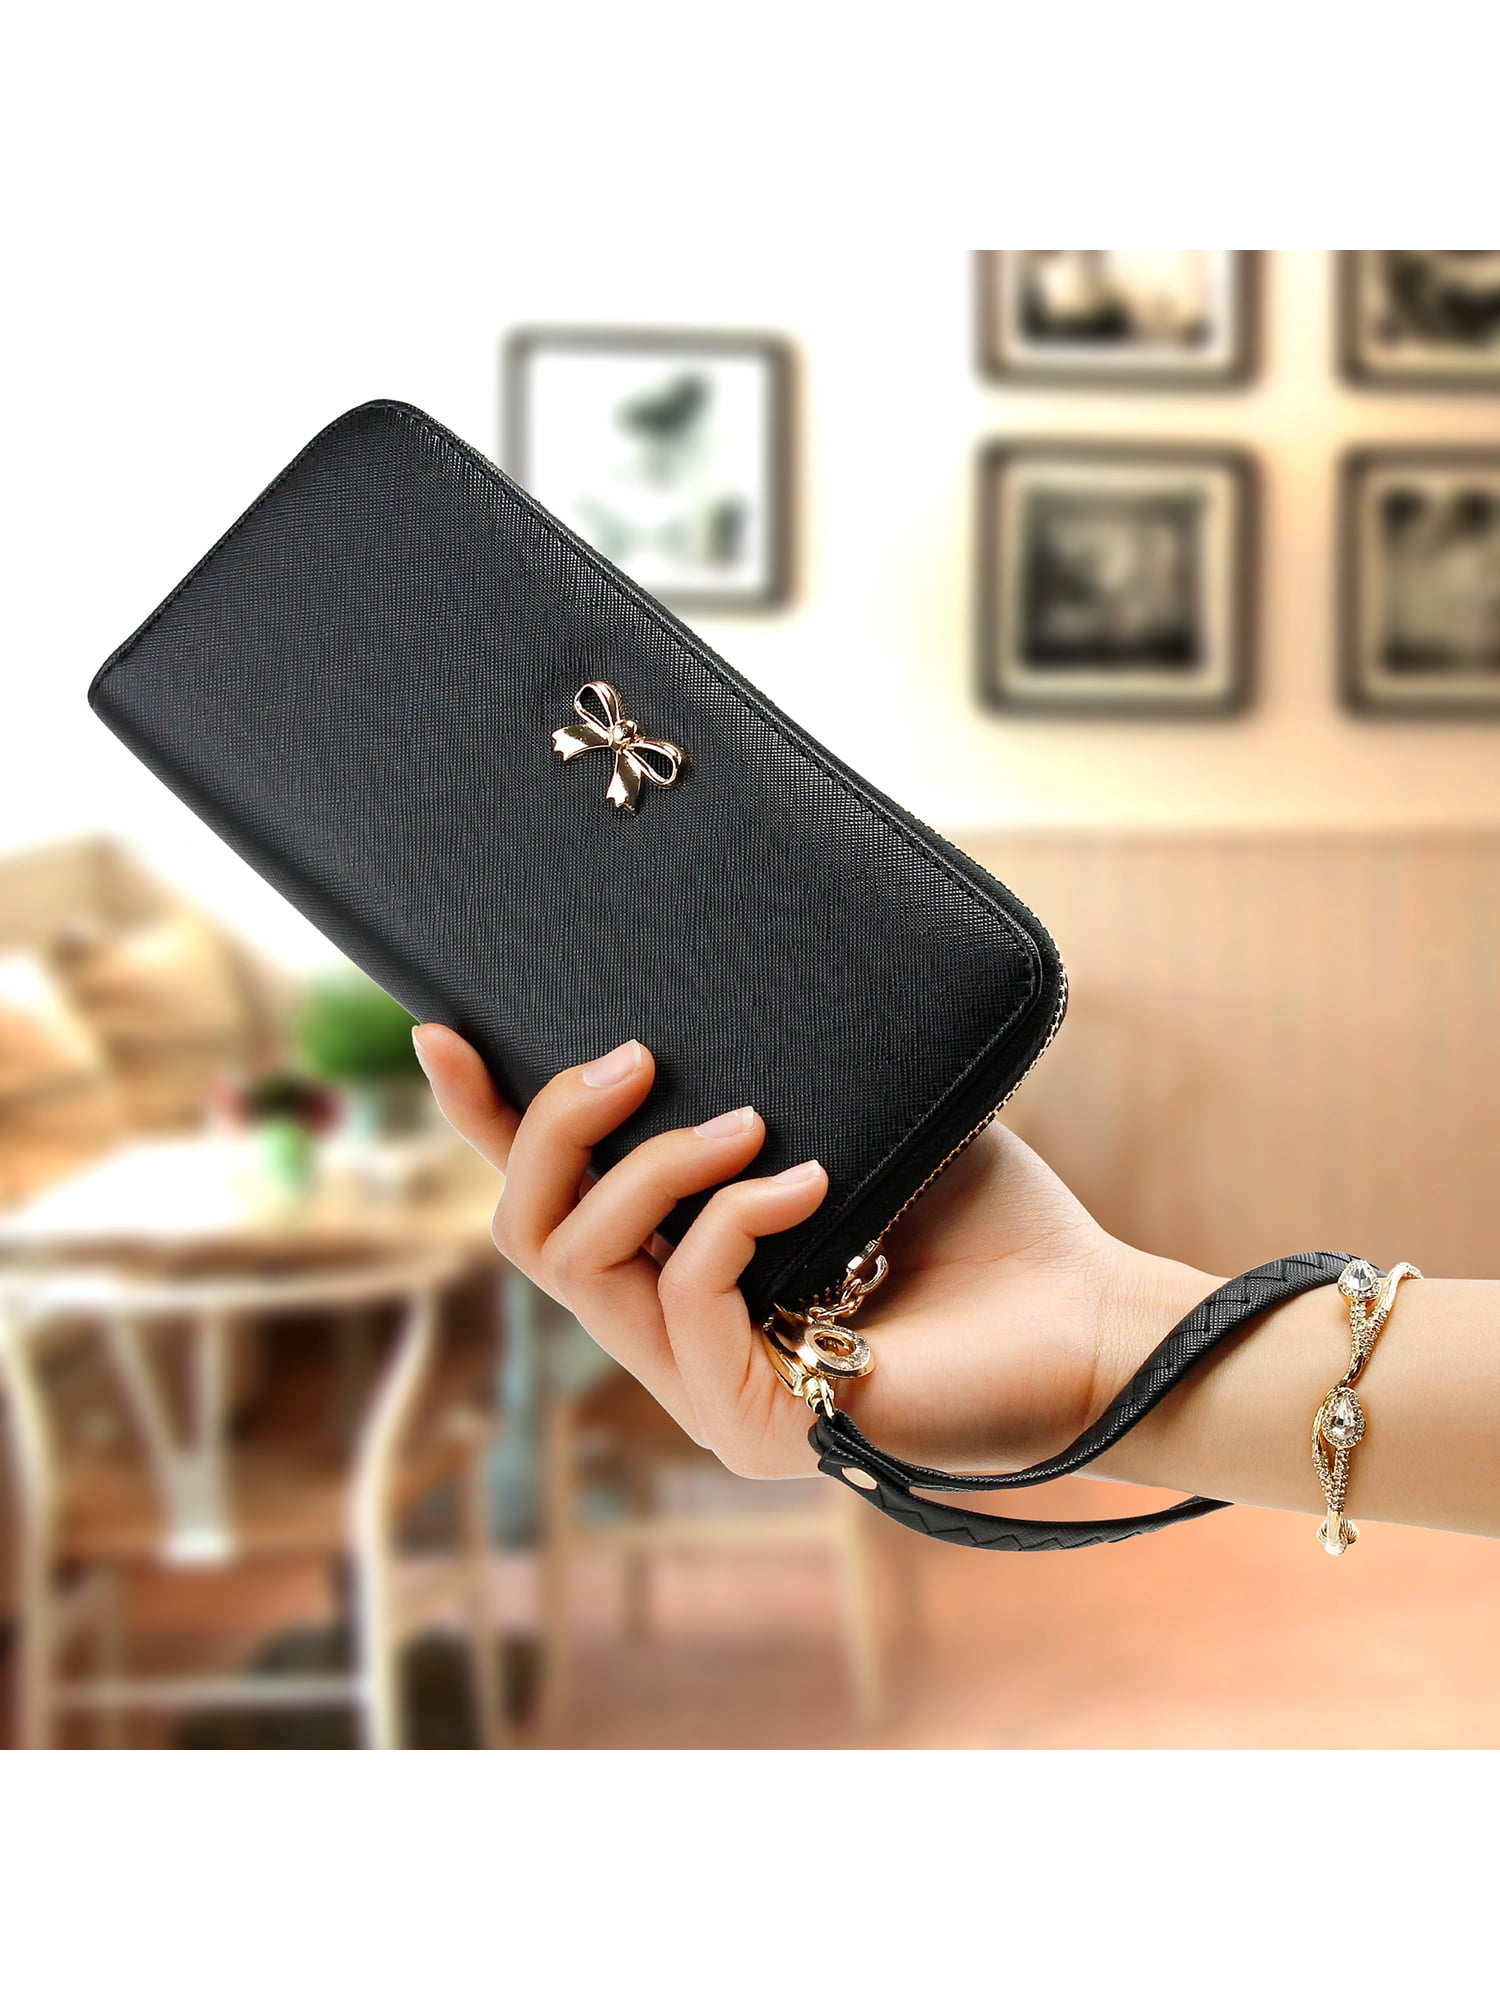 Women's Wallet Clutches Purse Long Leather Cute Shoe Purse With Bandage